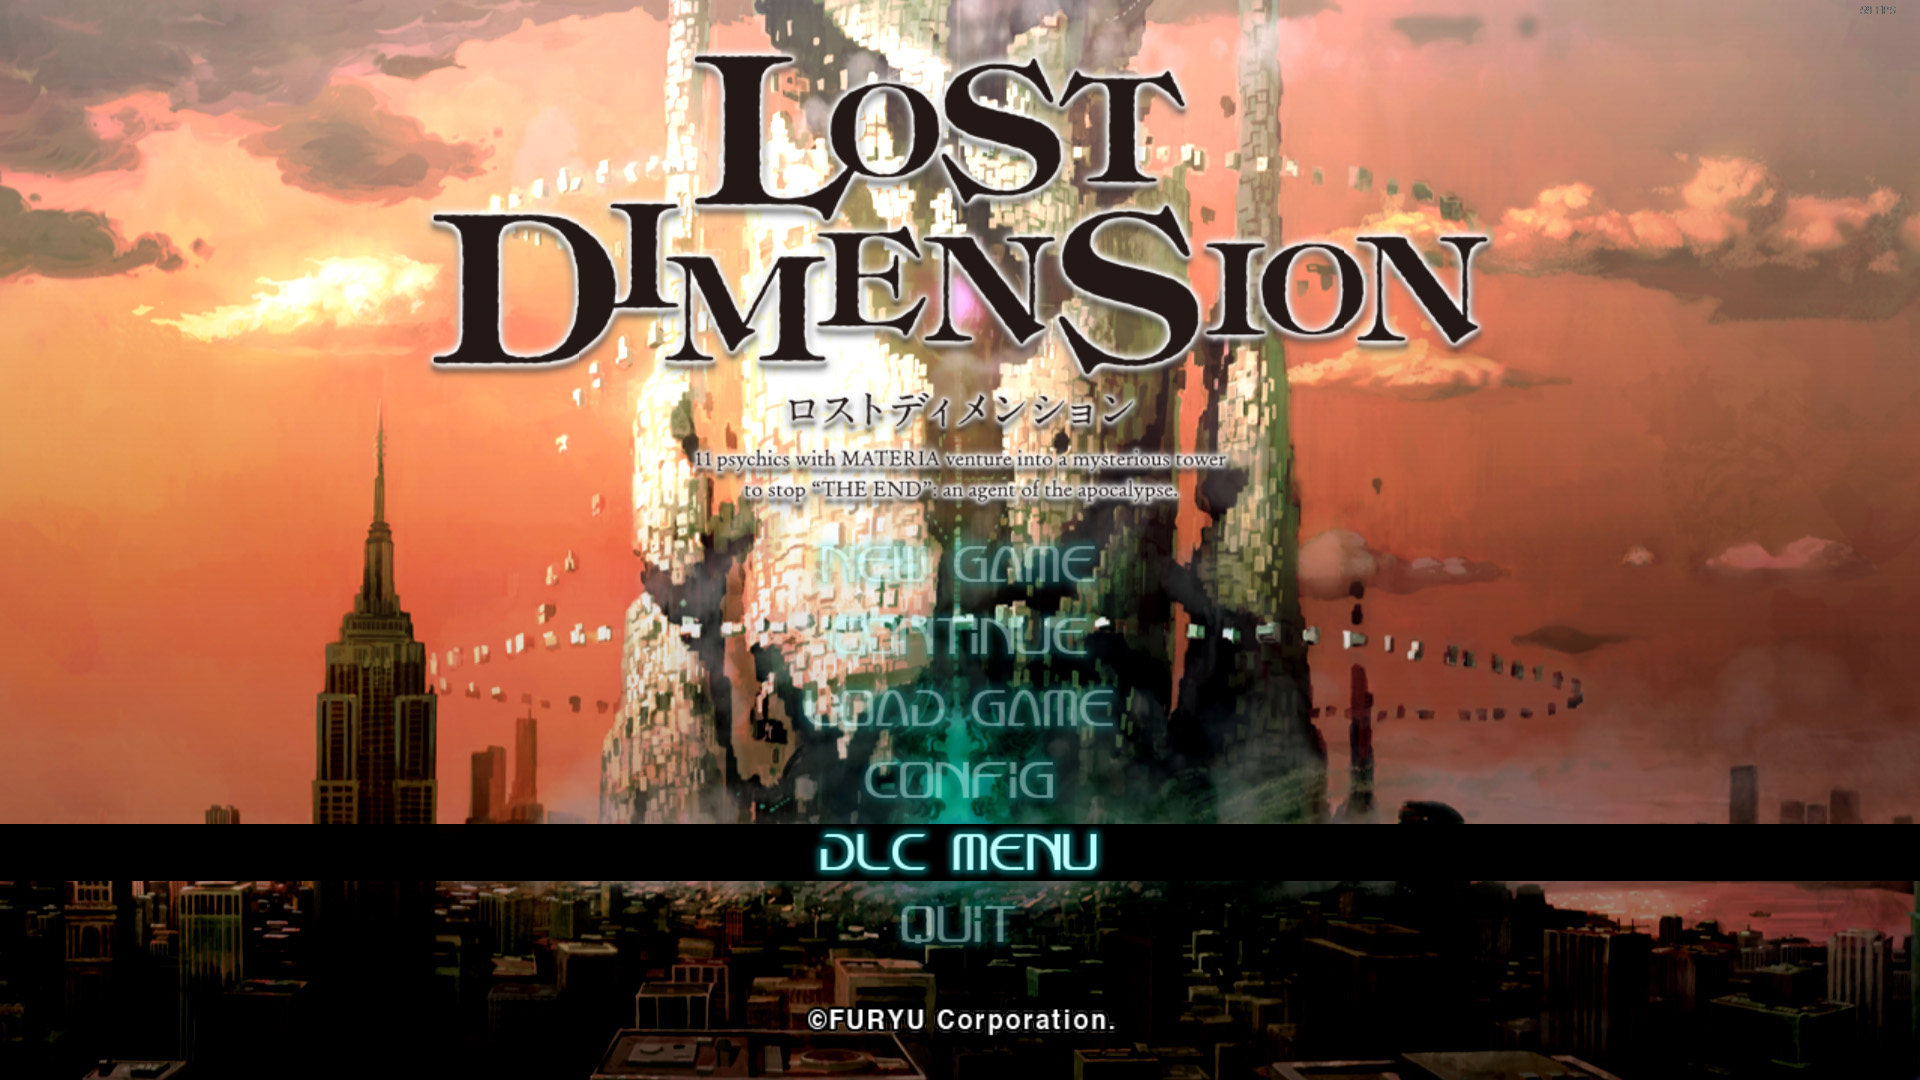 Lost Dimension: Level All Bundle Featured Screenshot #1